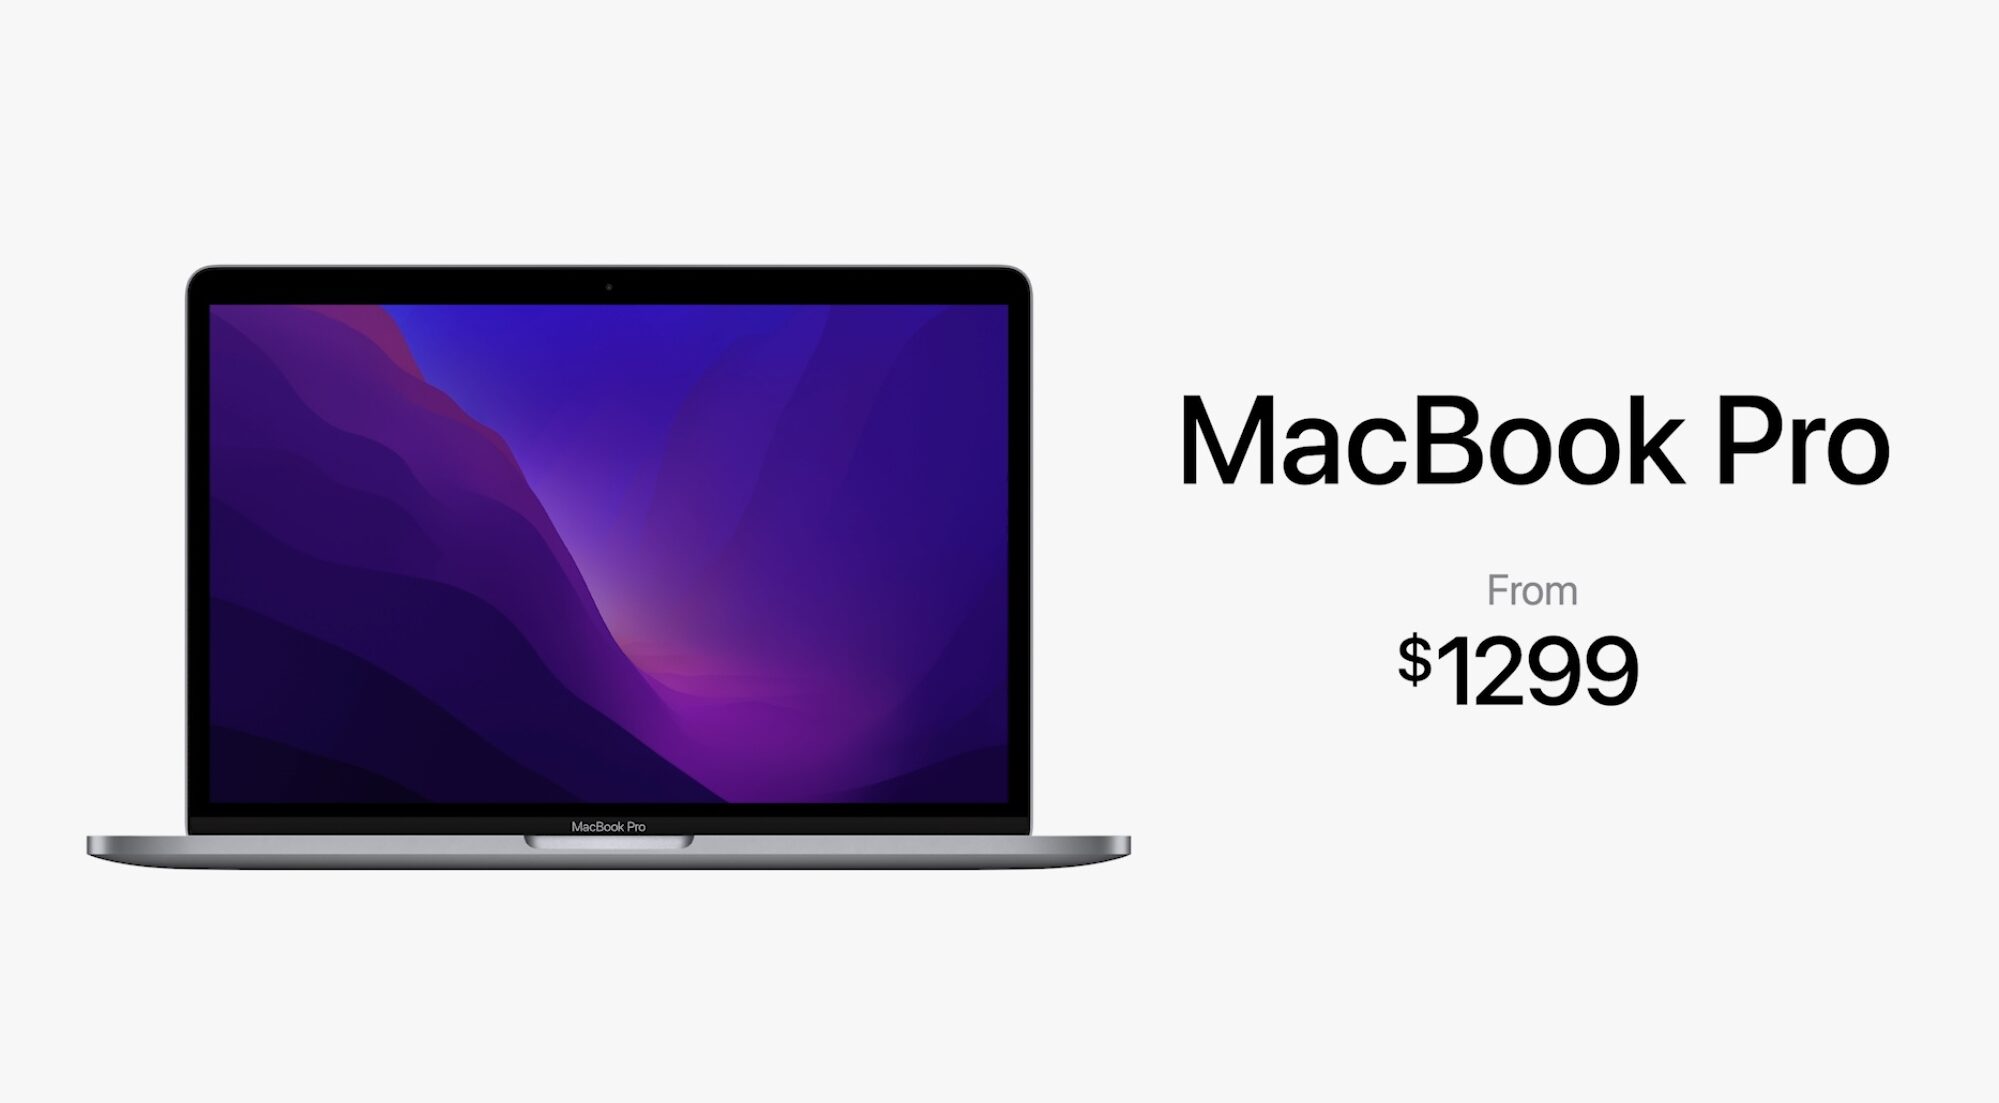 Apple's marketing image showcasing the $1299 asking price for its refreshed 130inch MacBook Pro notebook with the M2 chip